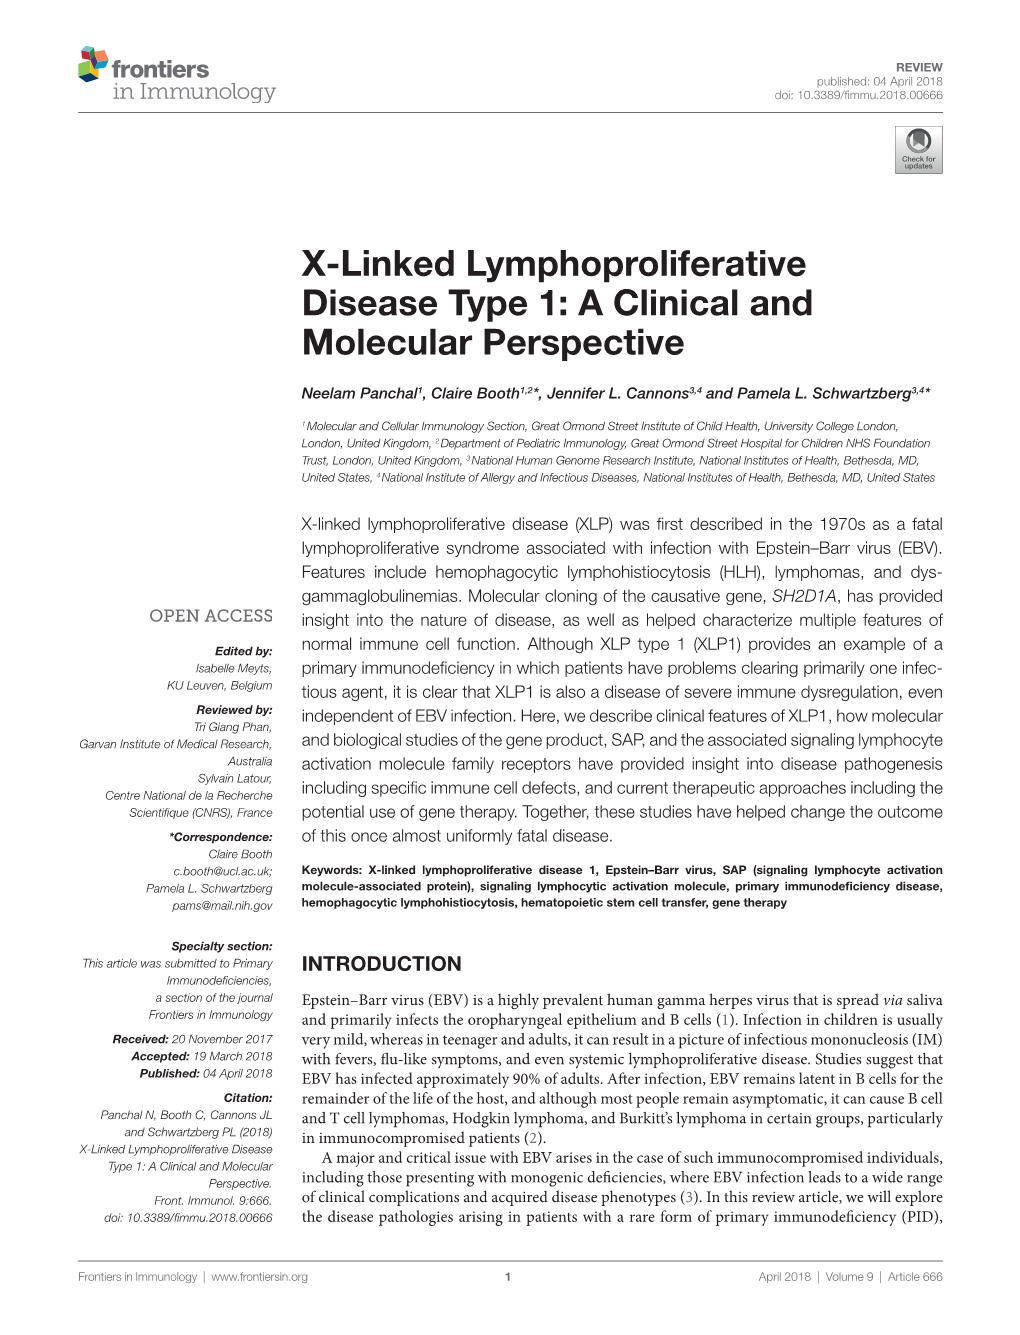 X-Linked Lymphoproliferative Disease Type 1: a Clinical and Molecular Perspective